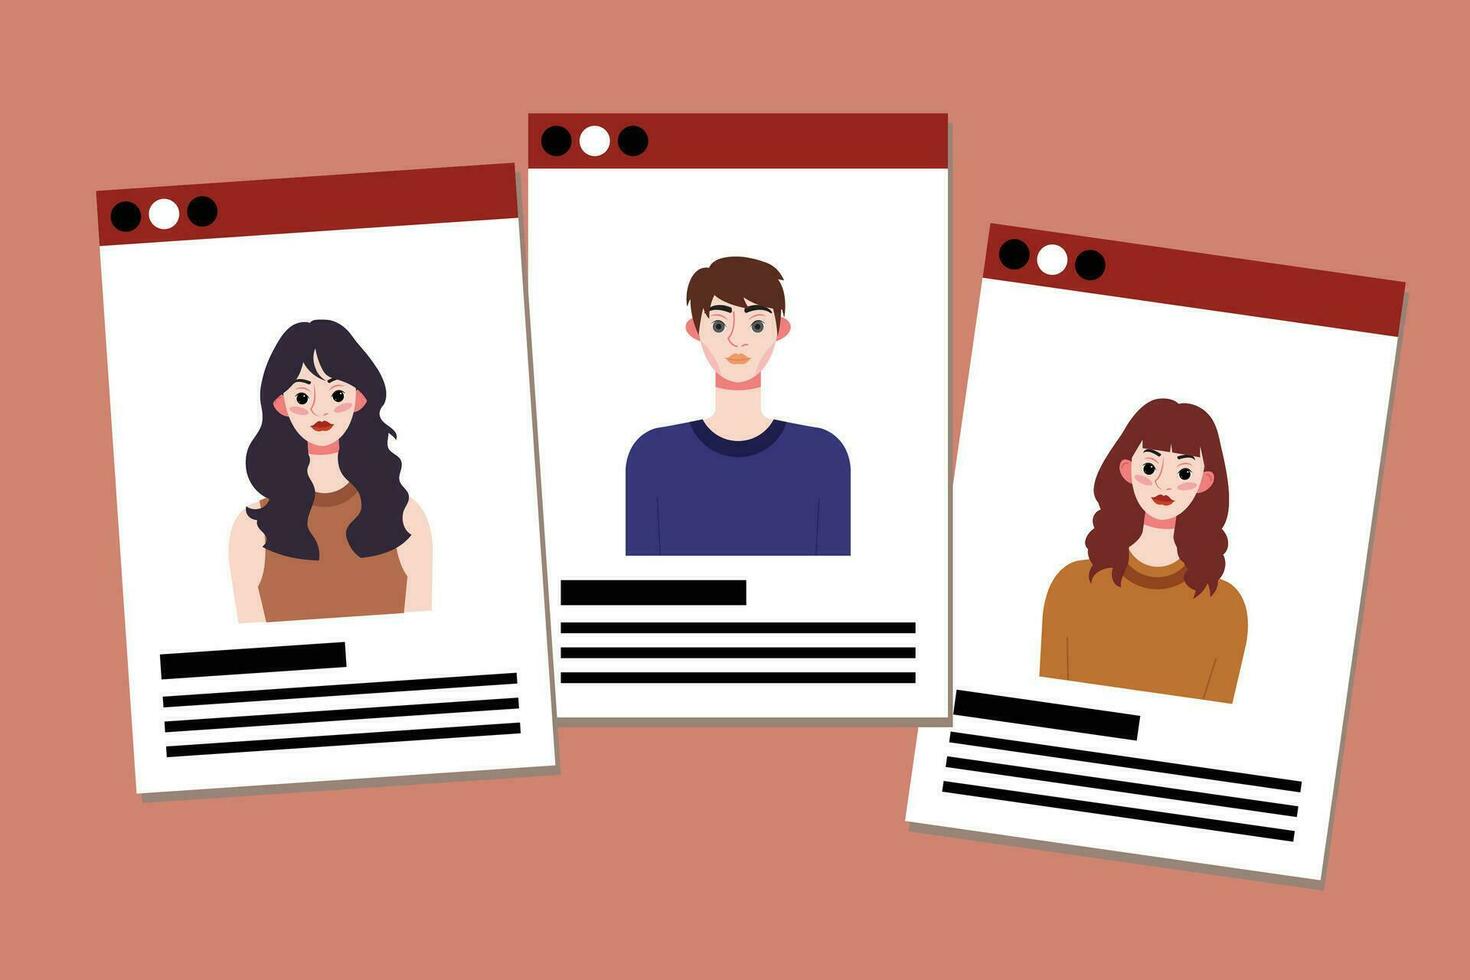 Set of profile photo templates for social networks. Vector illustration in flat style